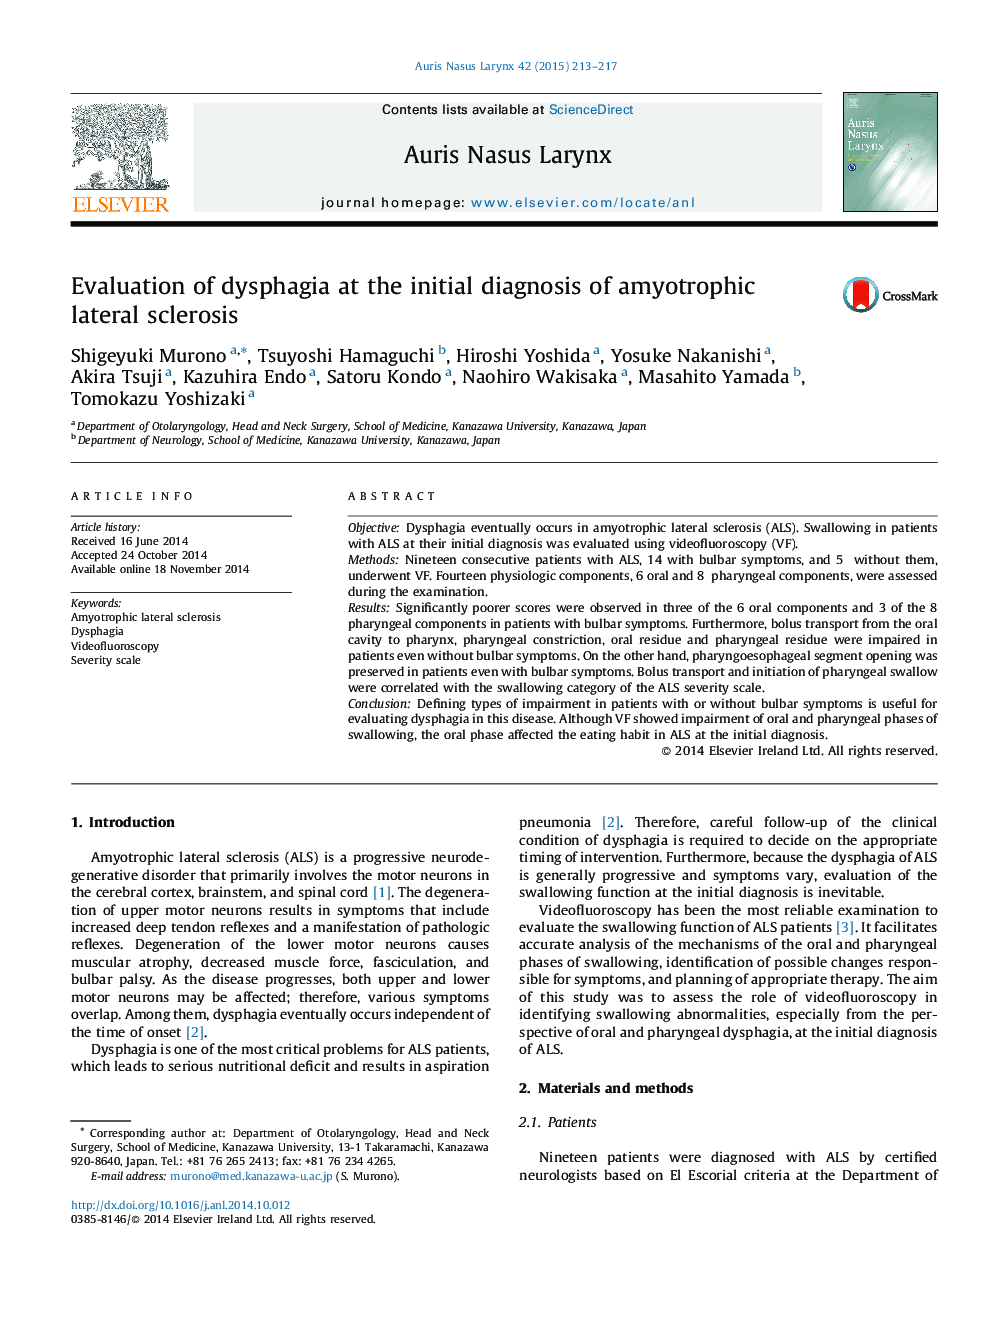 Evaluation of dysphagia at the initial diagnosis of amyotrophic lateral sclerosis